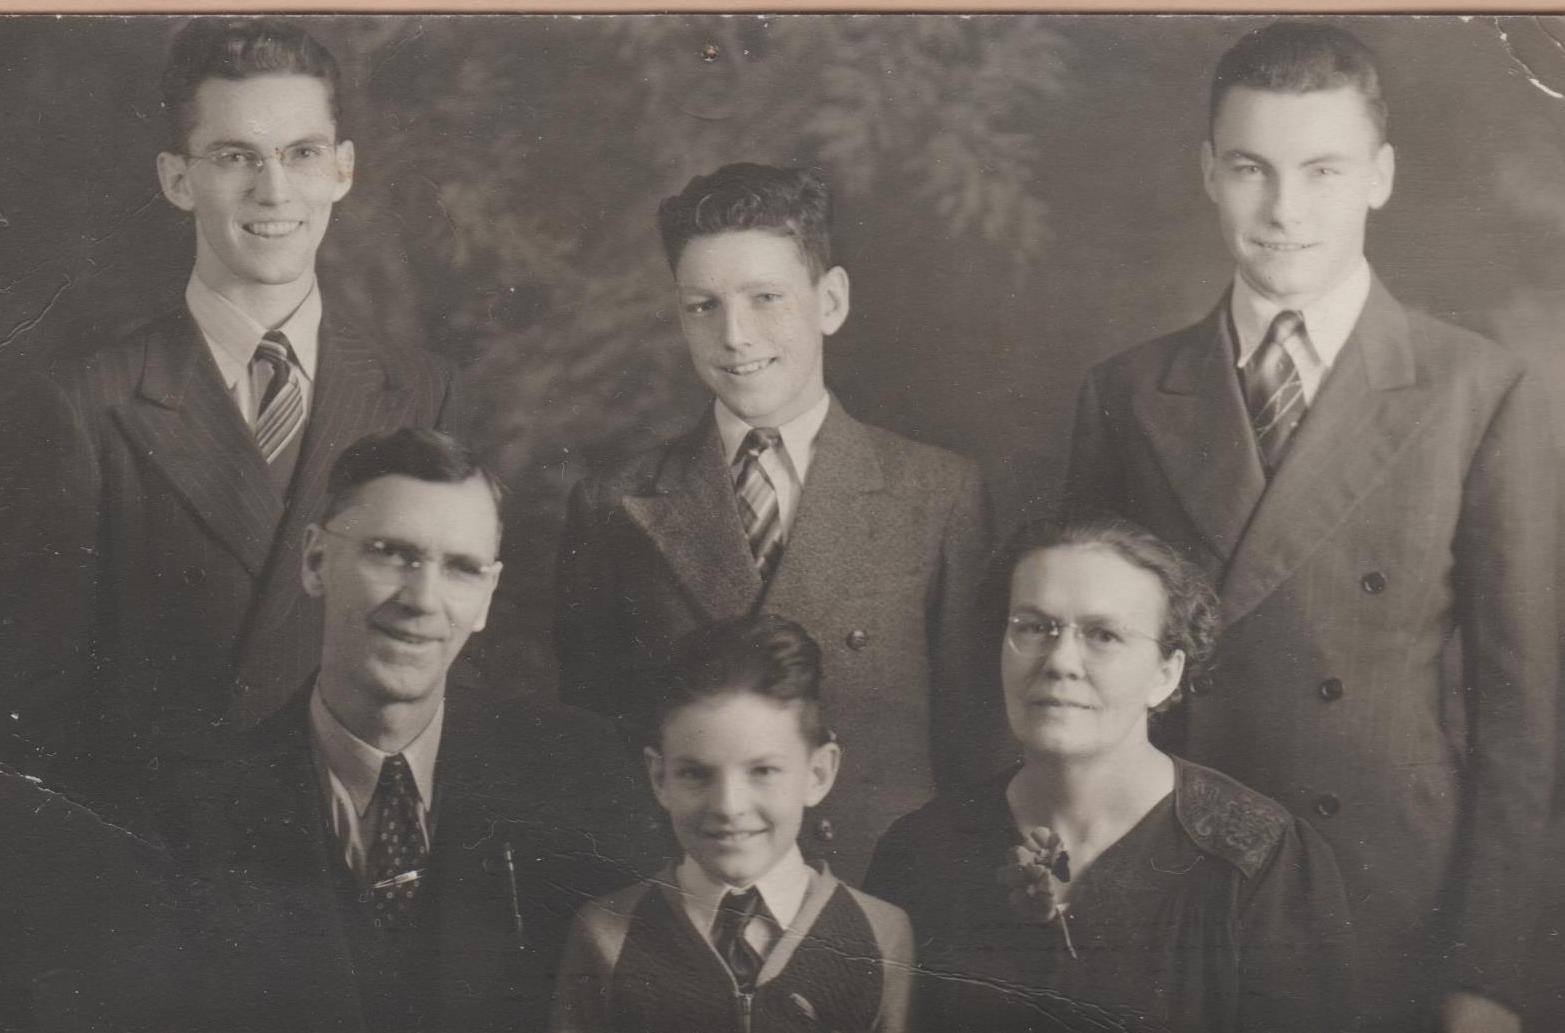 Check out the Early Mormon Missionaries site The Family History